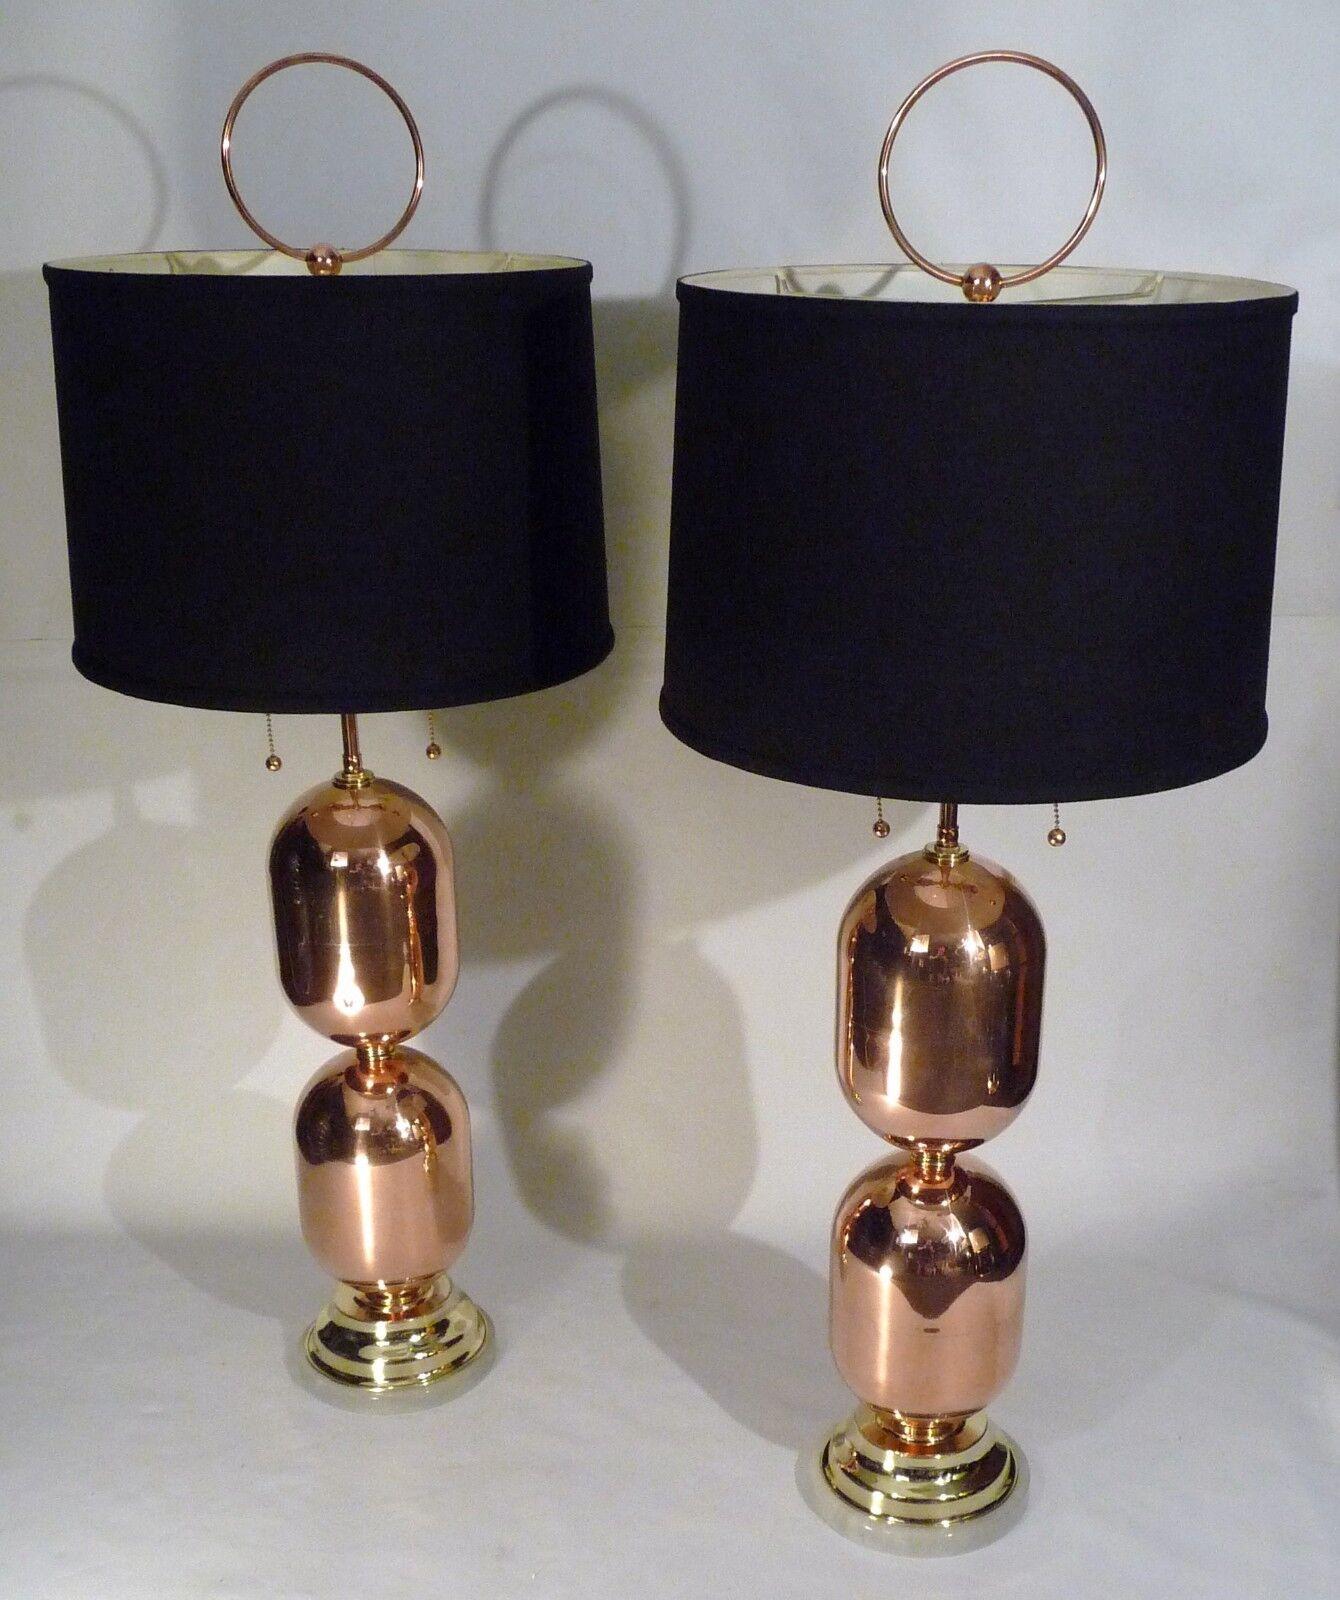 Pair of Mid-Century Modern Copper Architectural Table Lamps 1